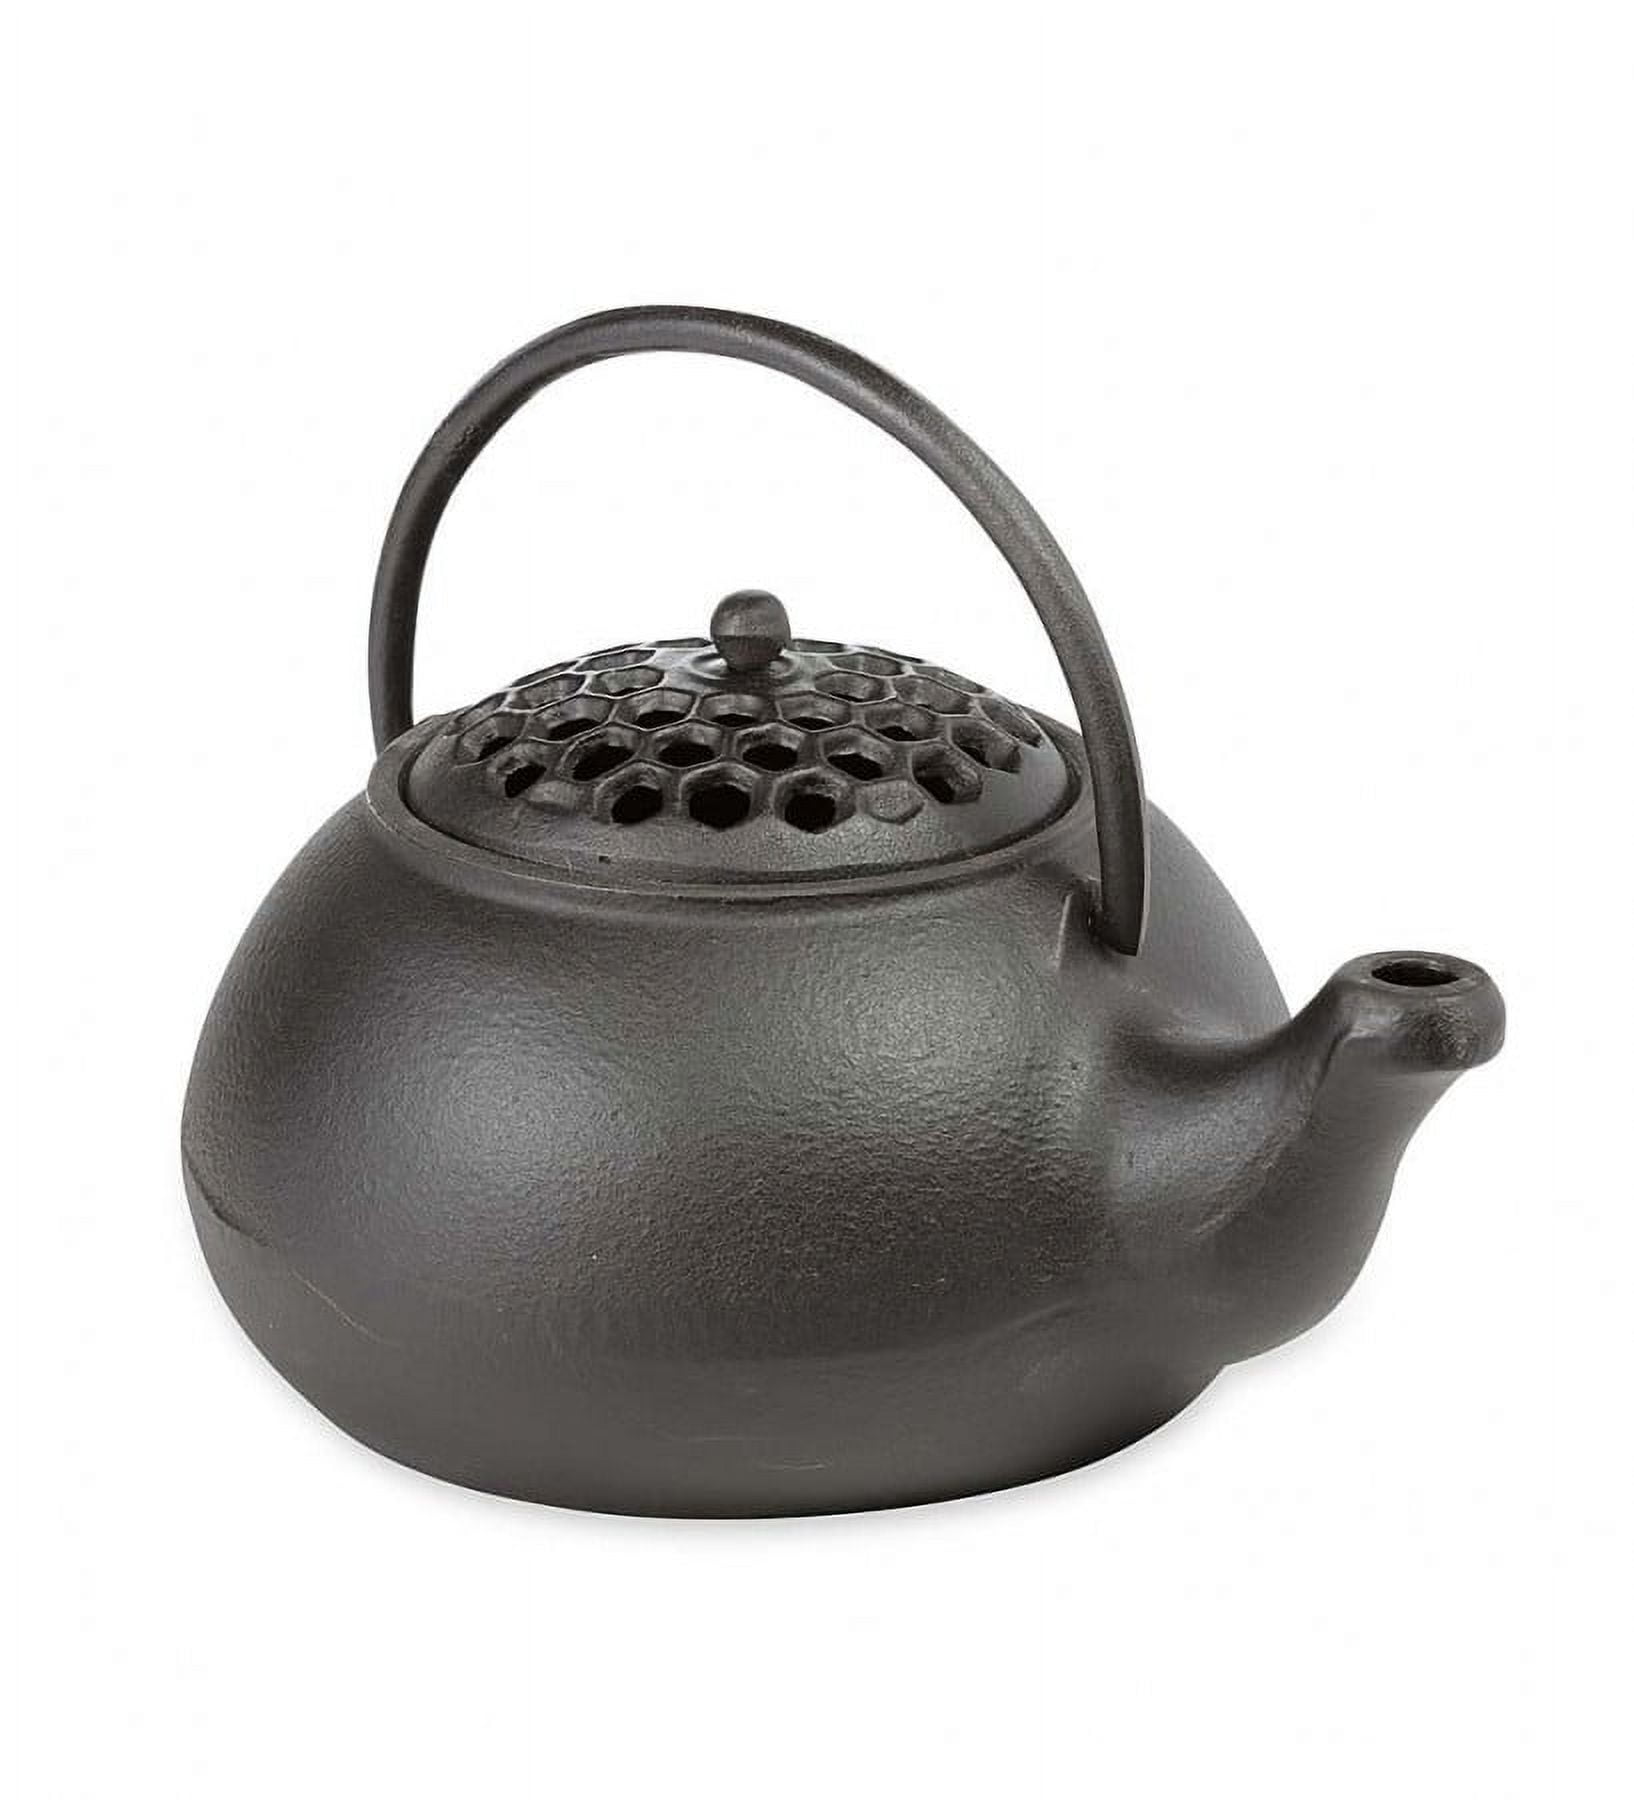 Plow & Hearth 12130-BK Cast Iron Wood Stove Kettle  